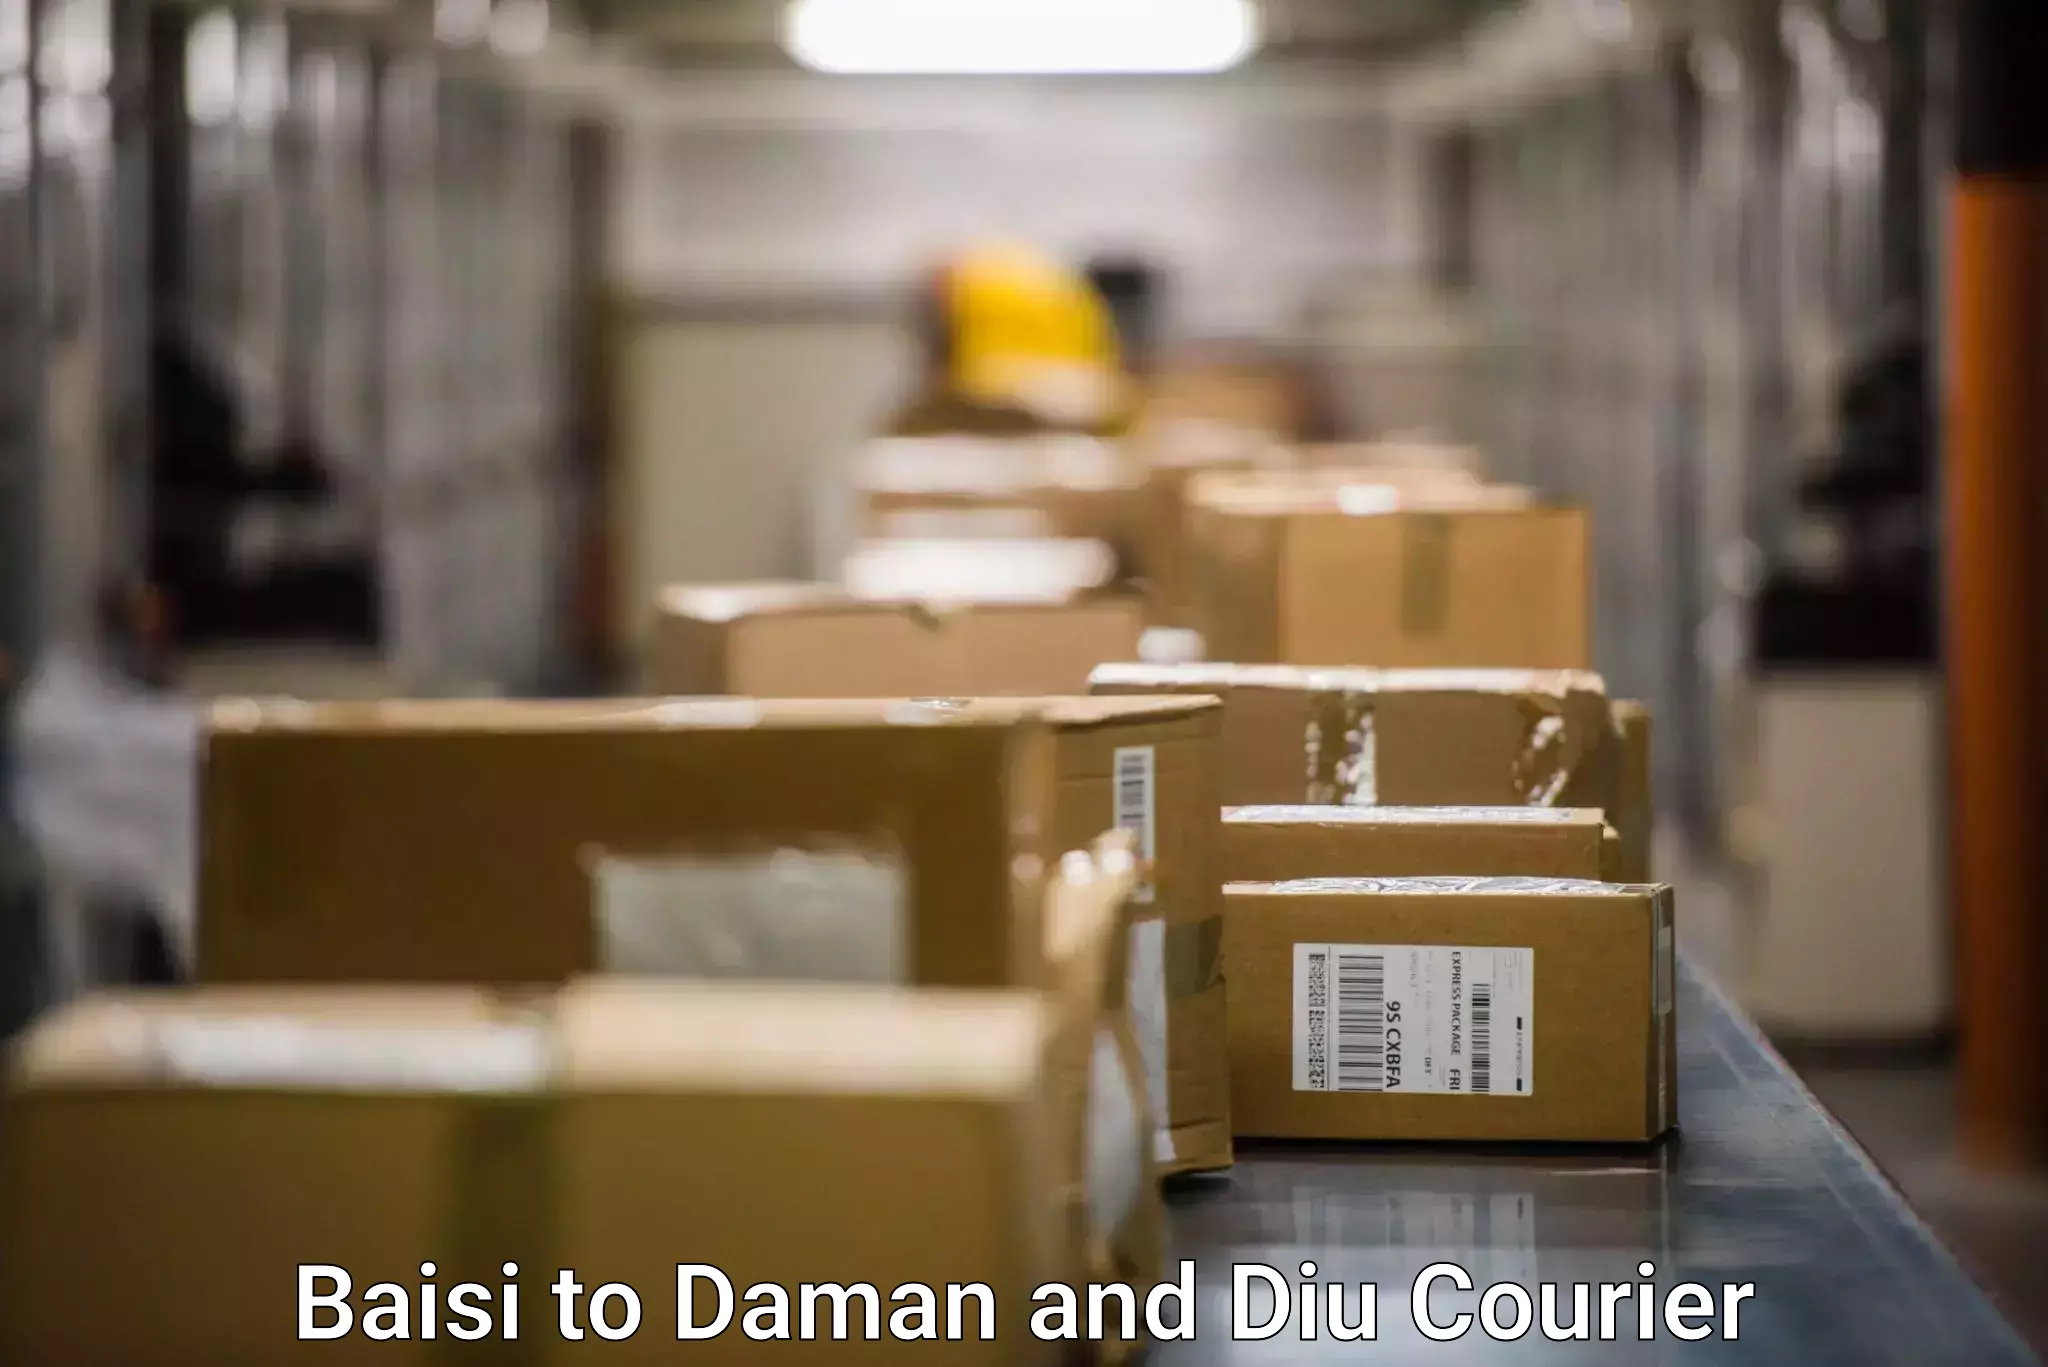 Reliable delivery network Baisi to Daman and Diu